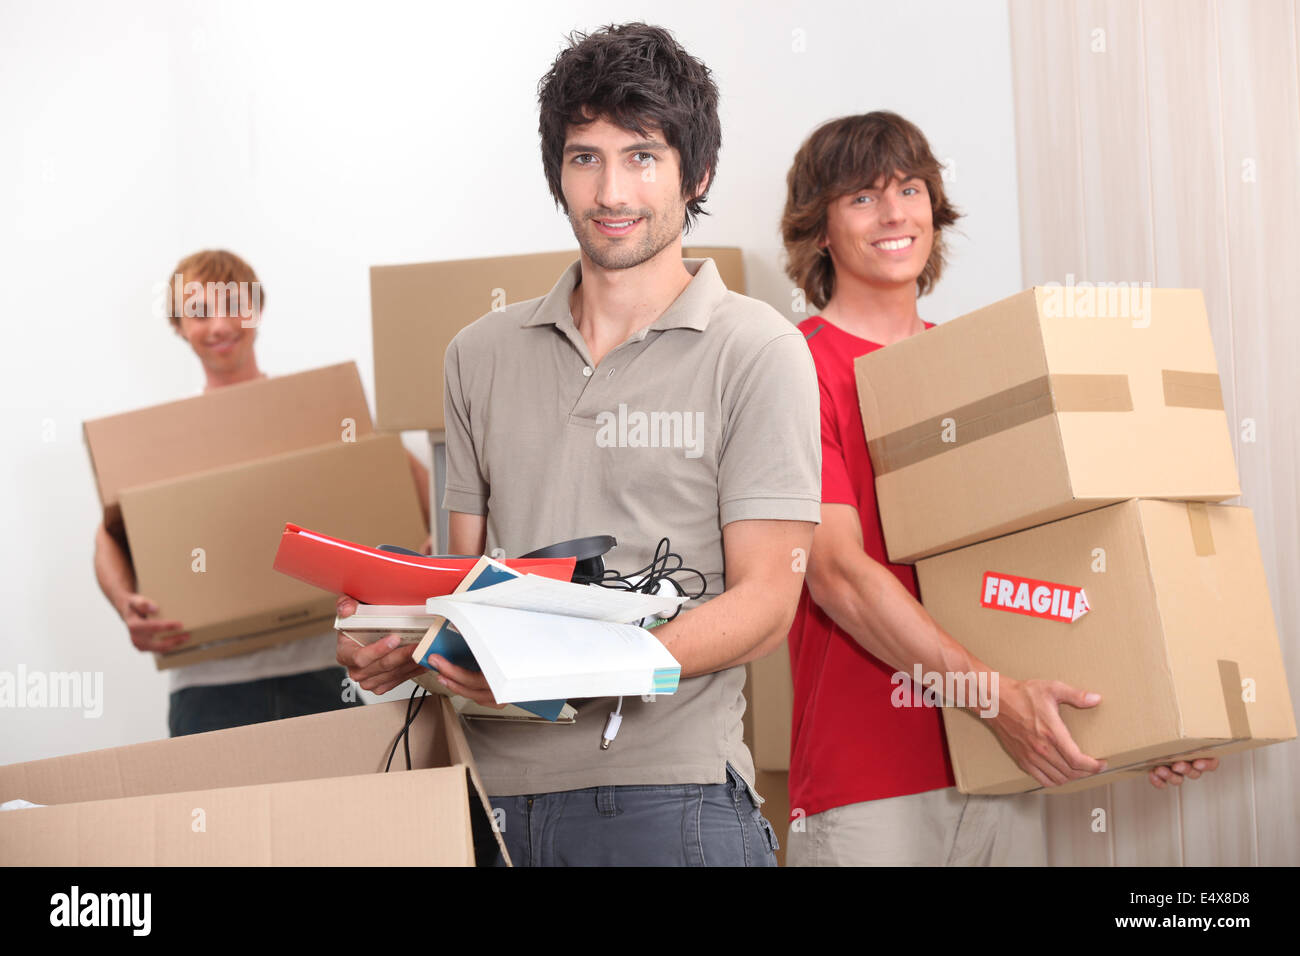 House mates carrying boxes Stock Photo